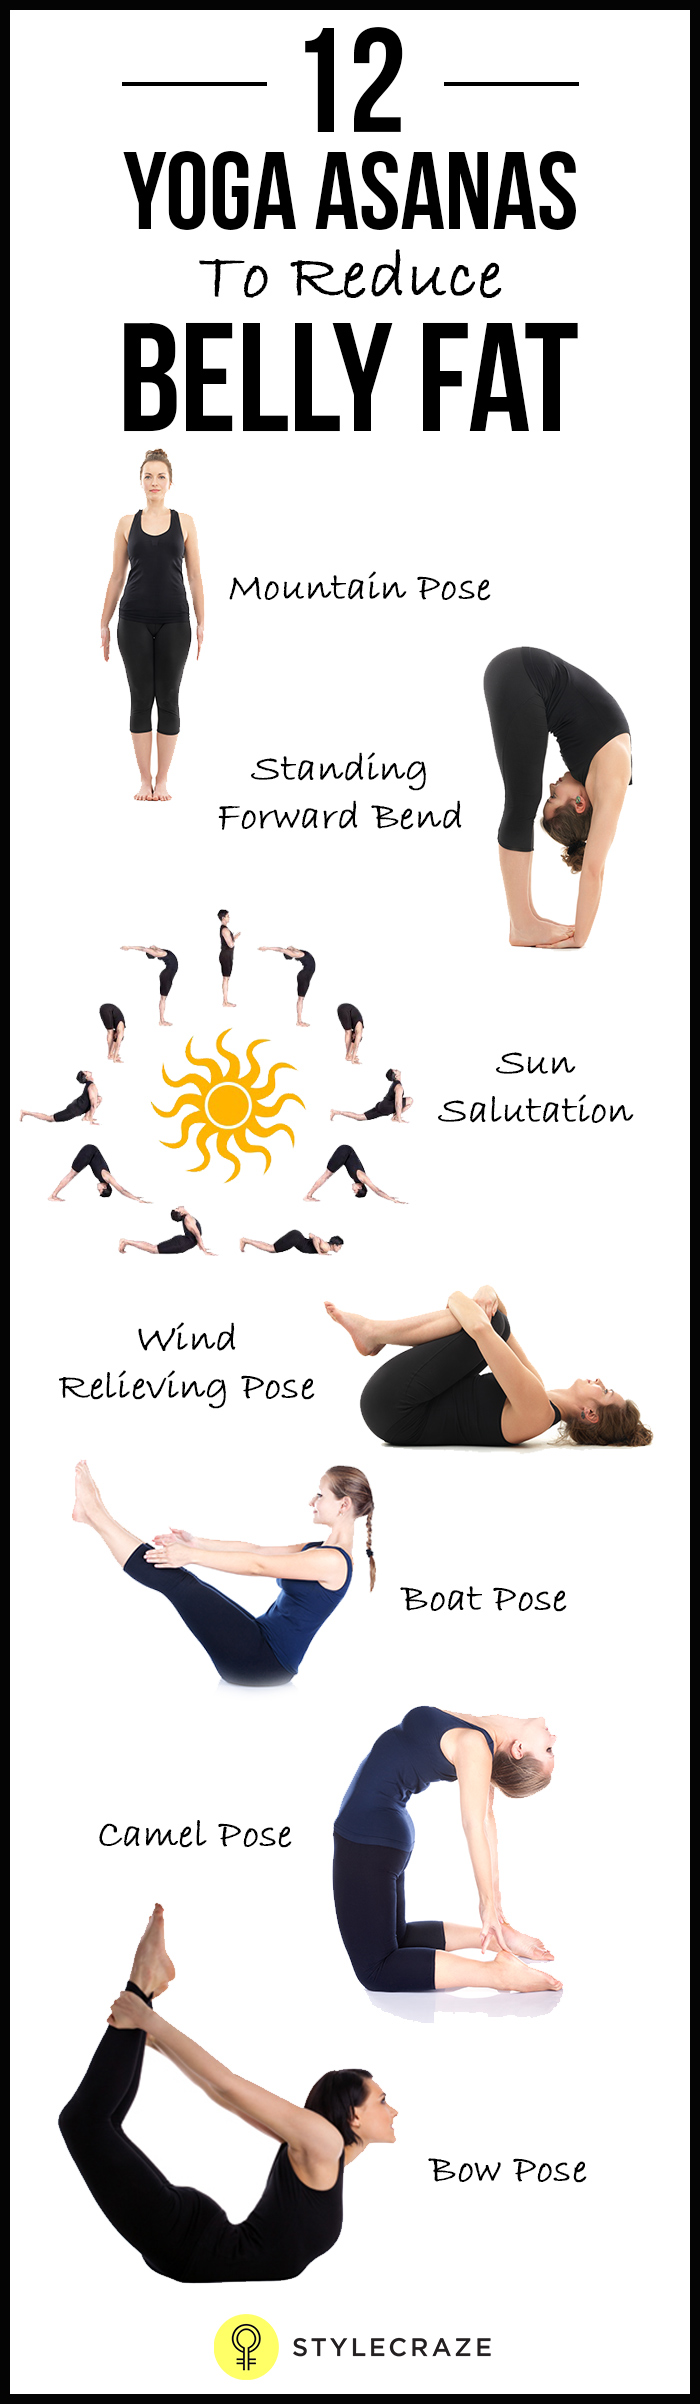 Top 10 Yoga Asanas for Weight Loss Fast with Pictures